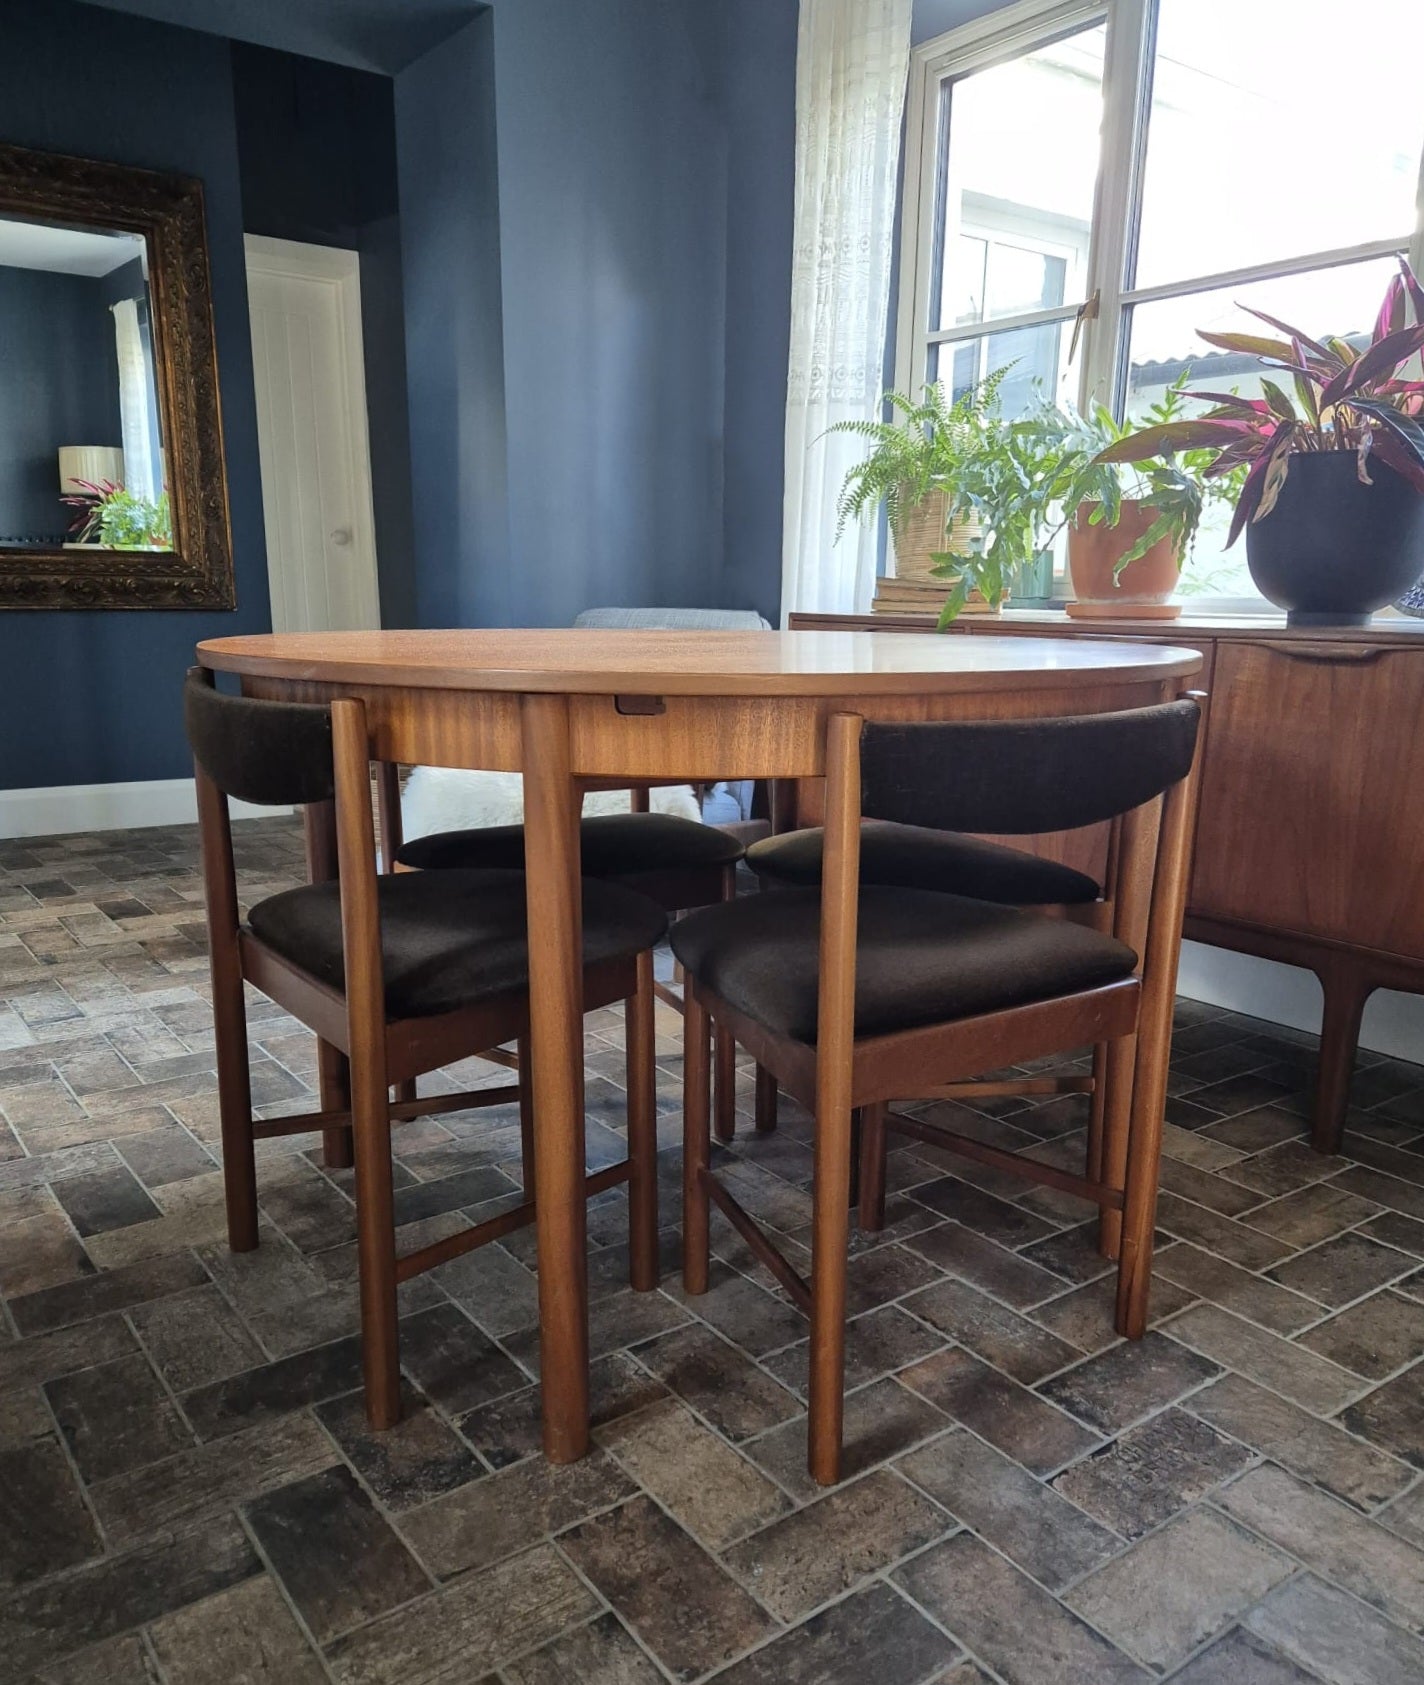 McIntosh Dining table & chairs